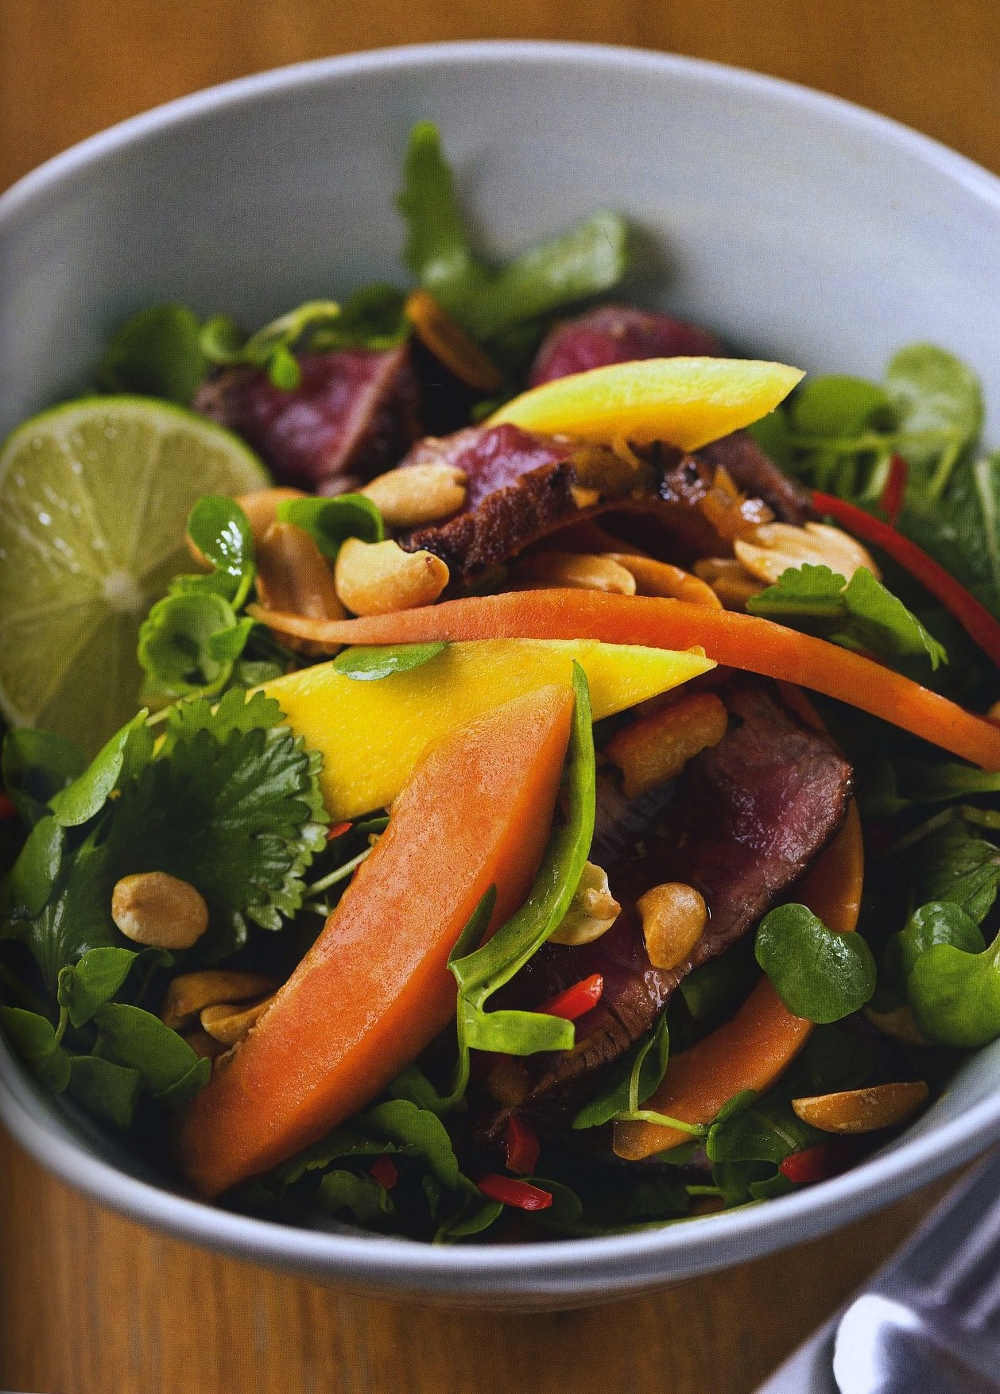 Zingy Beef With A Salad Of Watercress, Mint, Mango And Peanuts